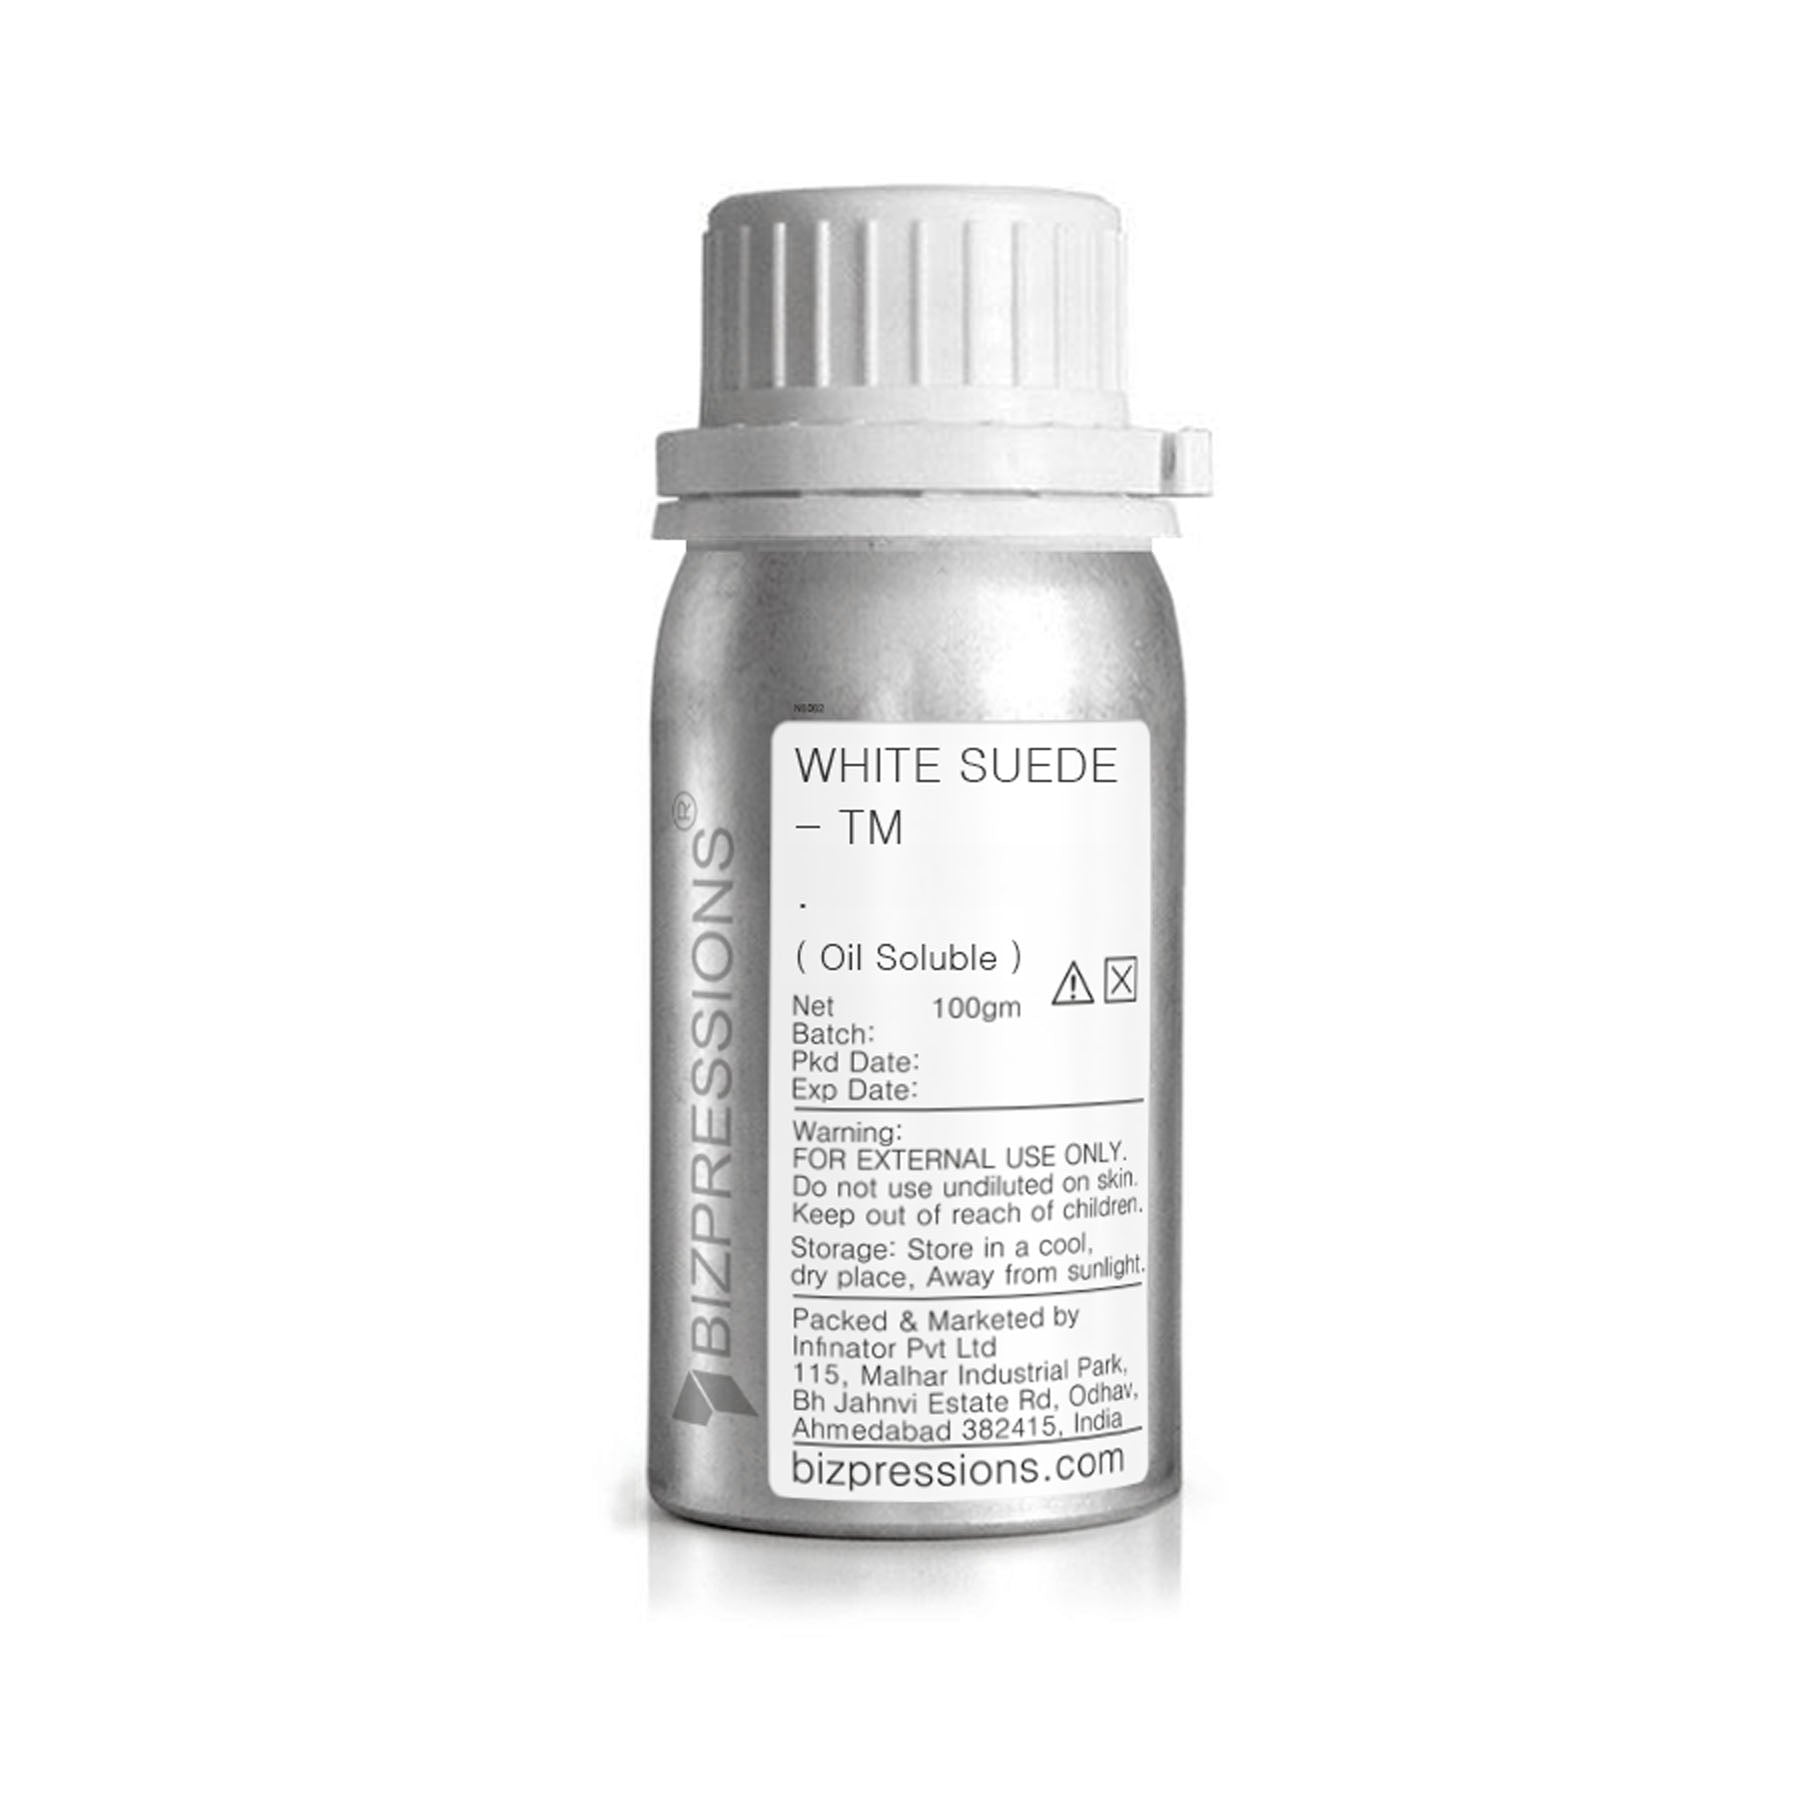 WHITE SUEDE - TM - Fragrance ( Oil Soluble ) - 100 gm